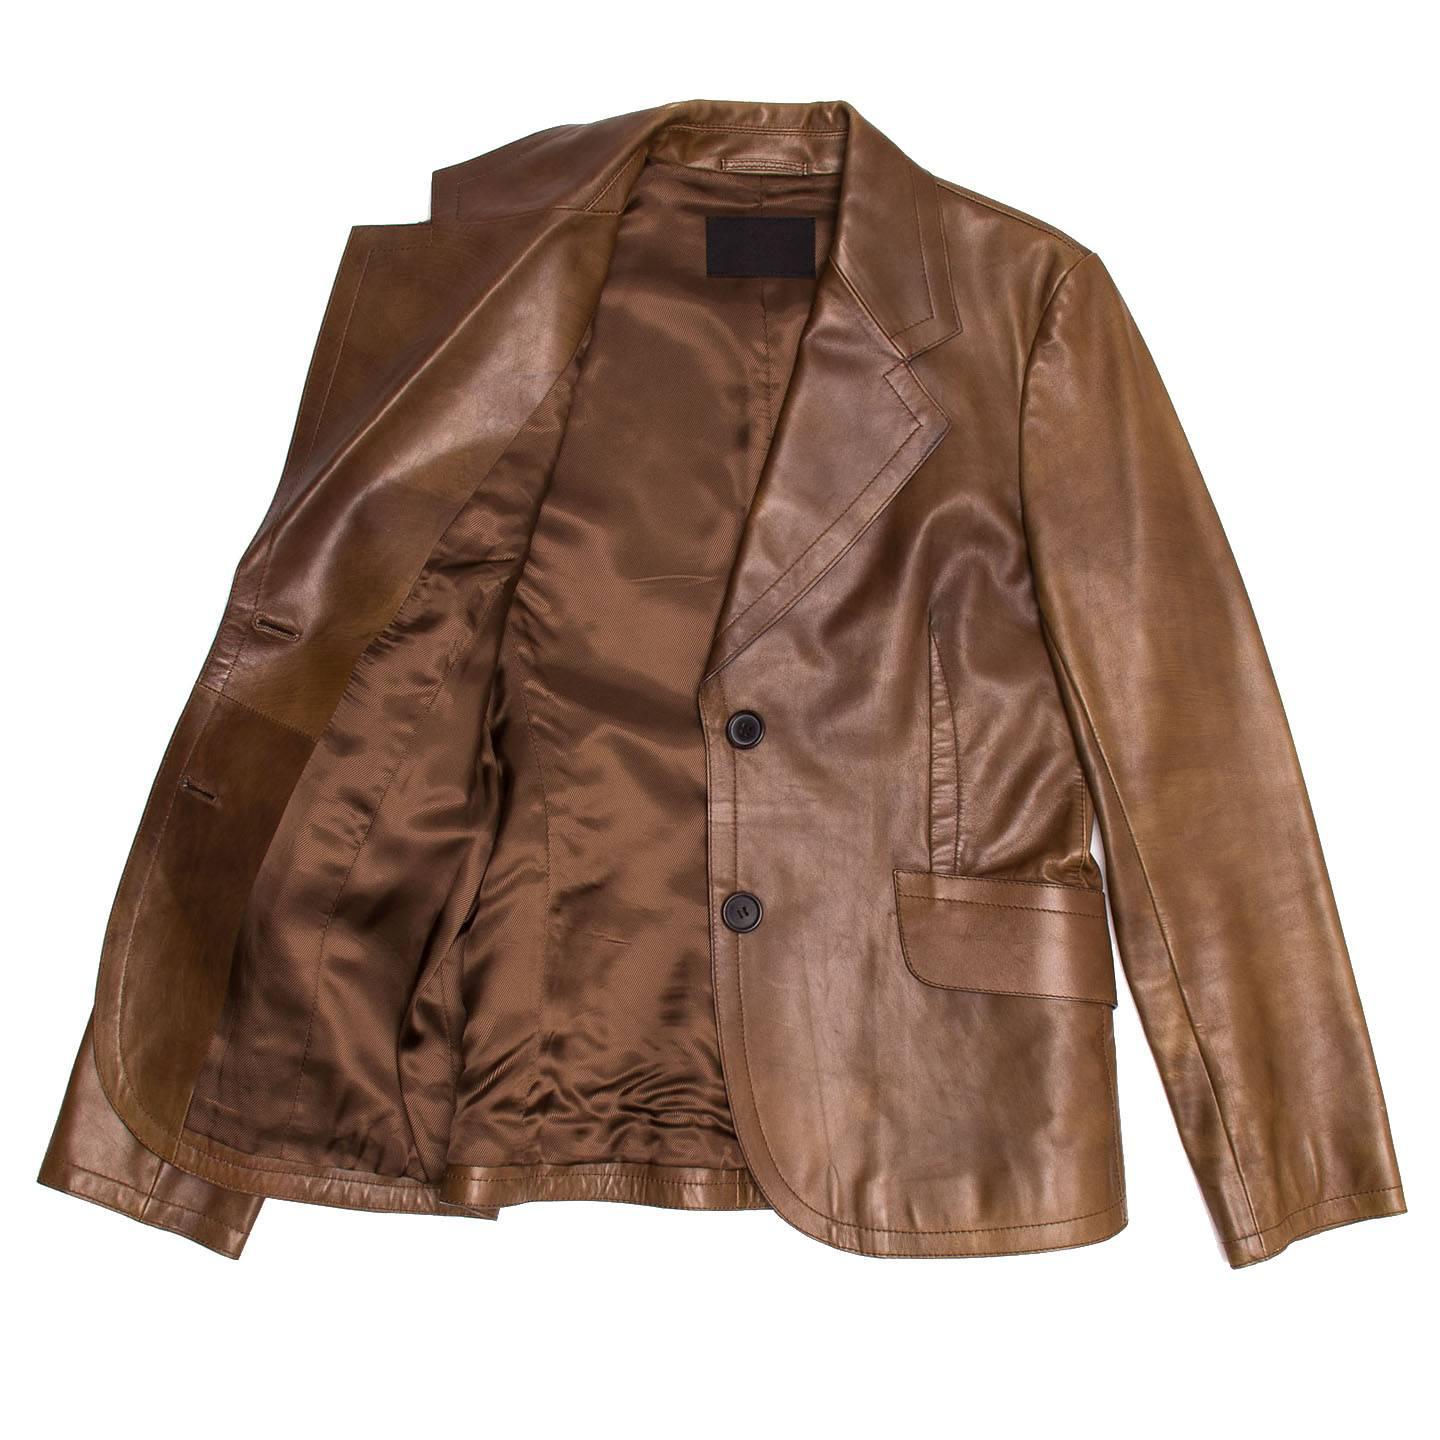 Prada Brown Semi-Distressed Leather Blazer In Excellent Condition For Sale In Brooklyn, NY